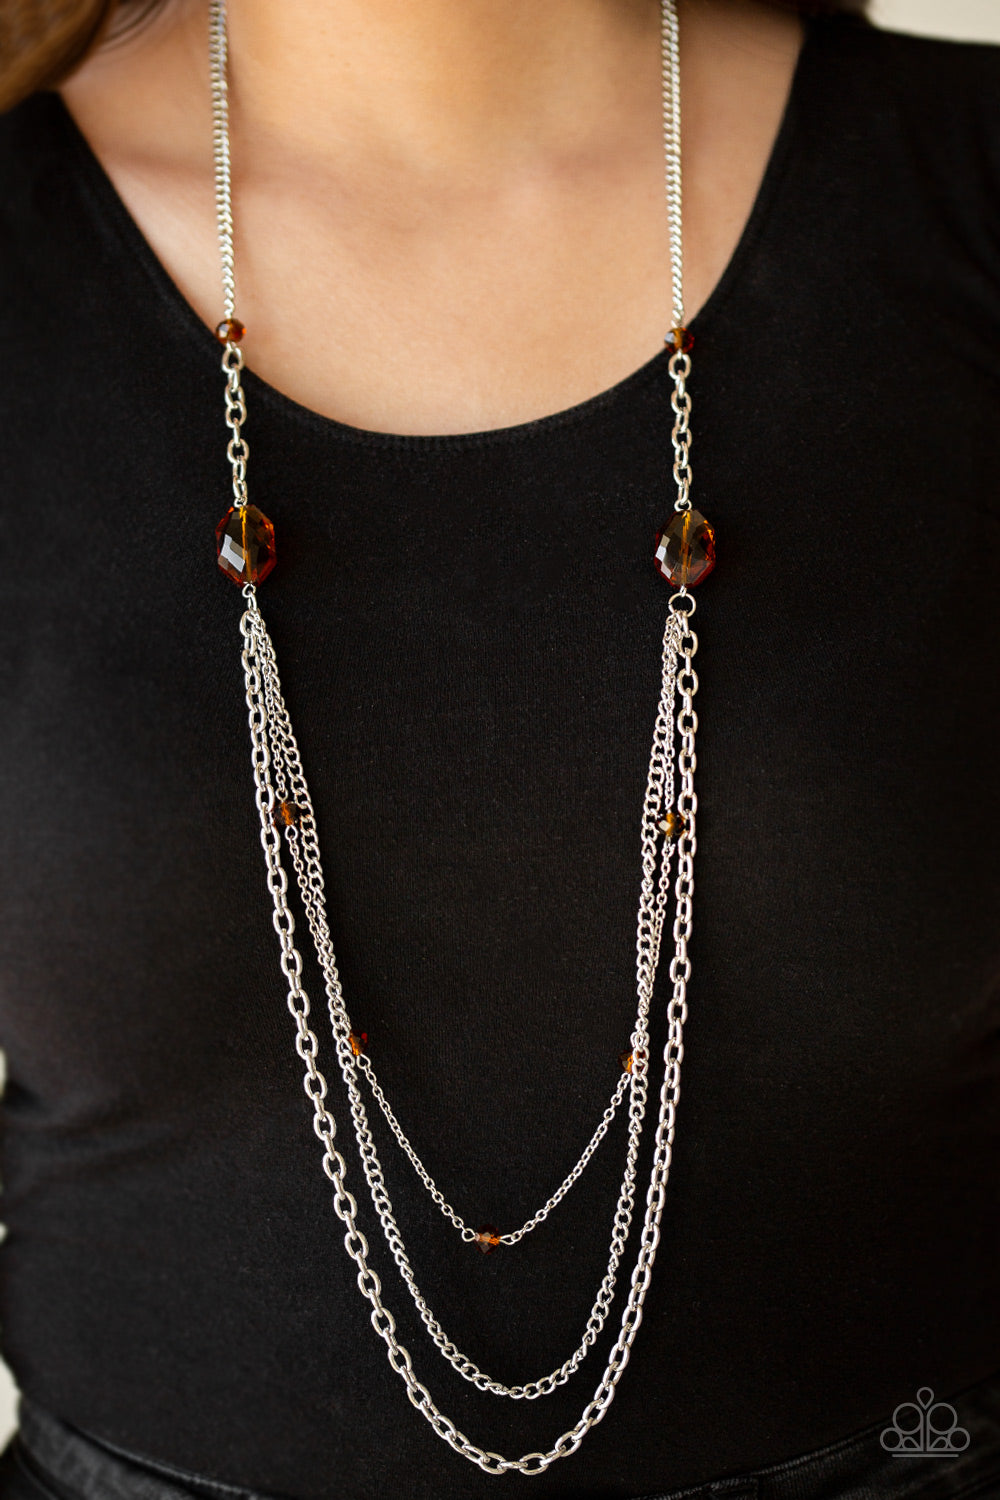 Paparazzi Dare to Dazzle - Brown - Glassy Beads - Silver Chains Necklace & Earrings - $5 Jewelry with Ashley Swint